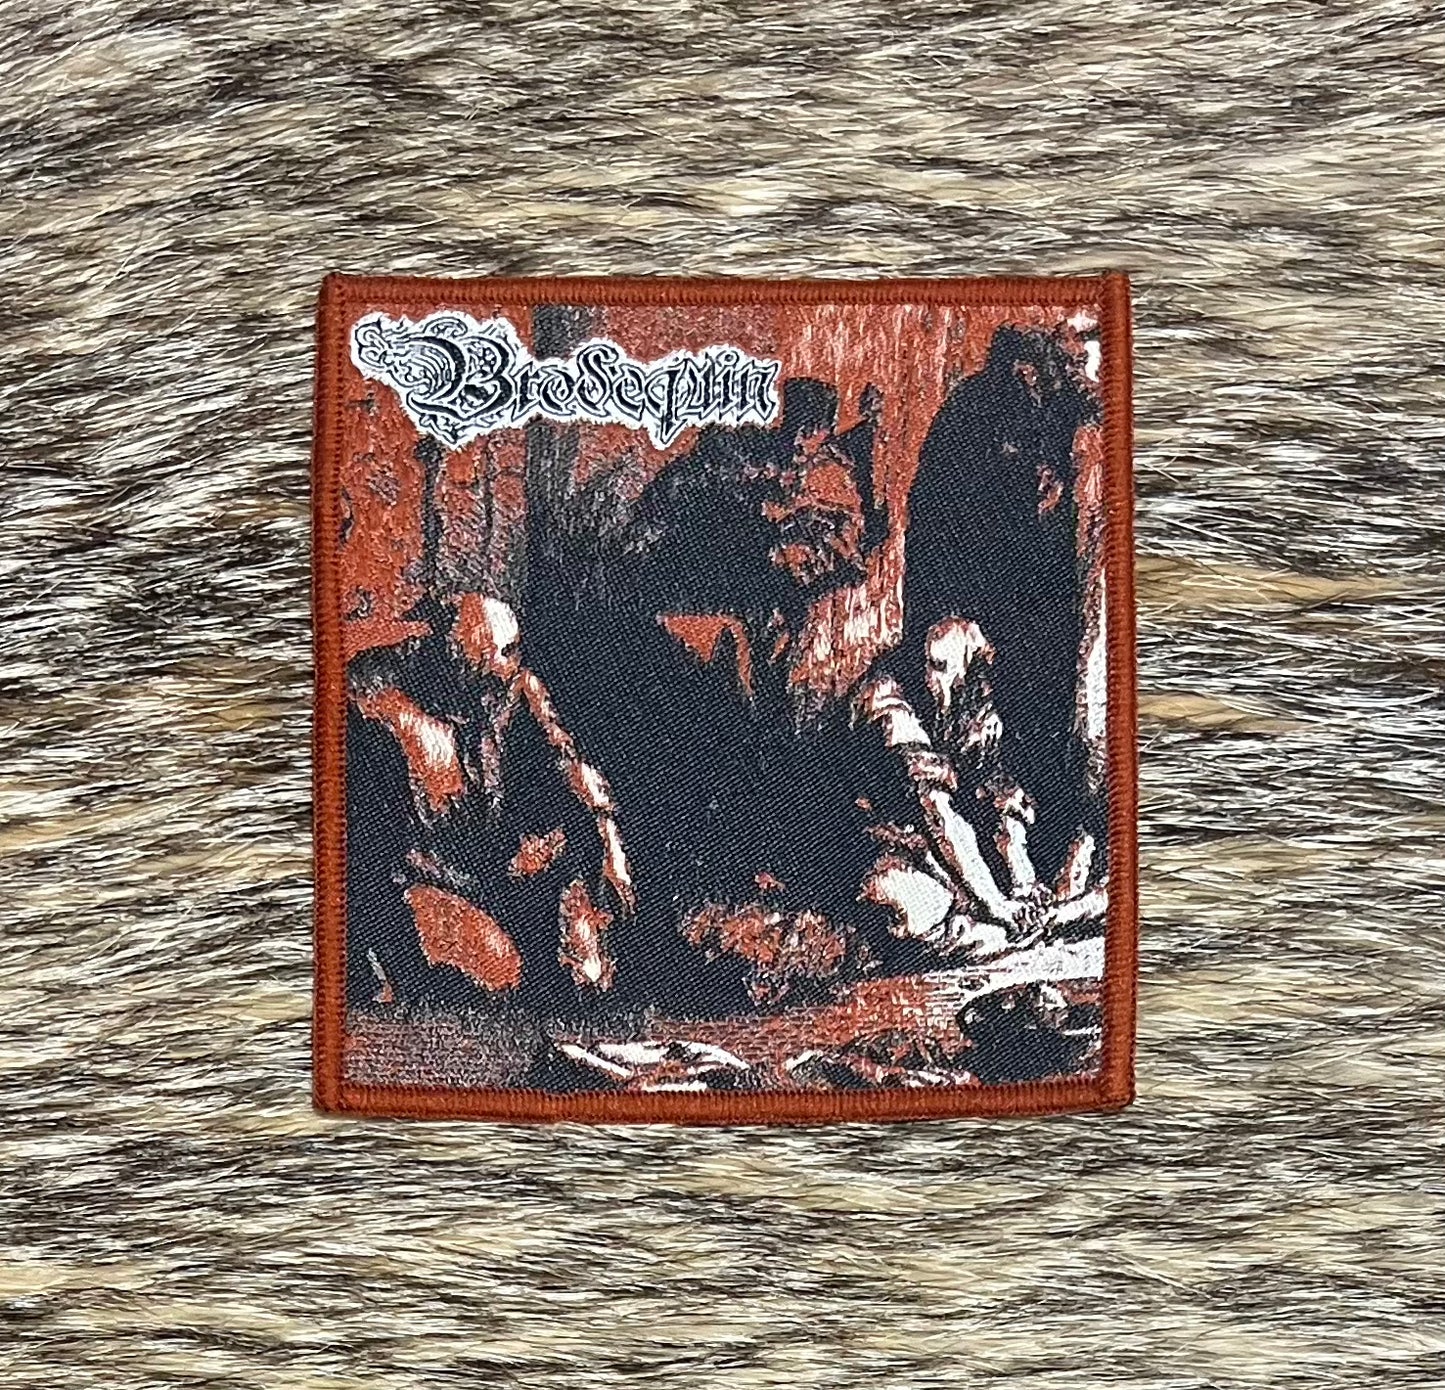 Brodequin - Patch